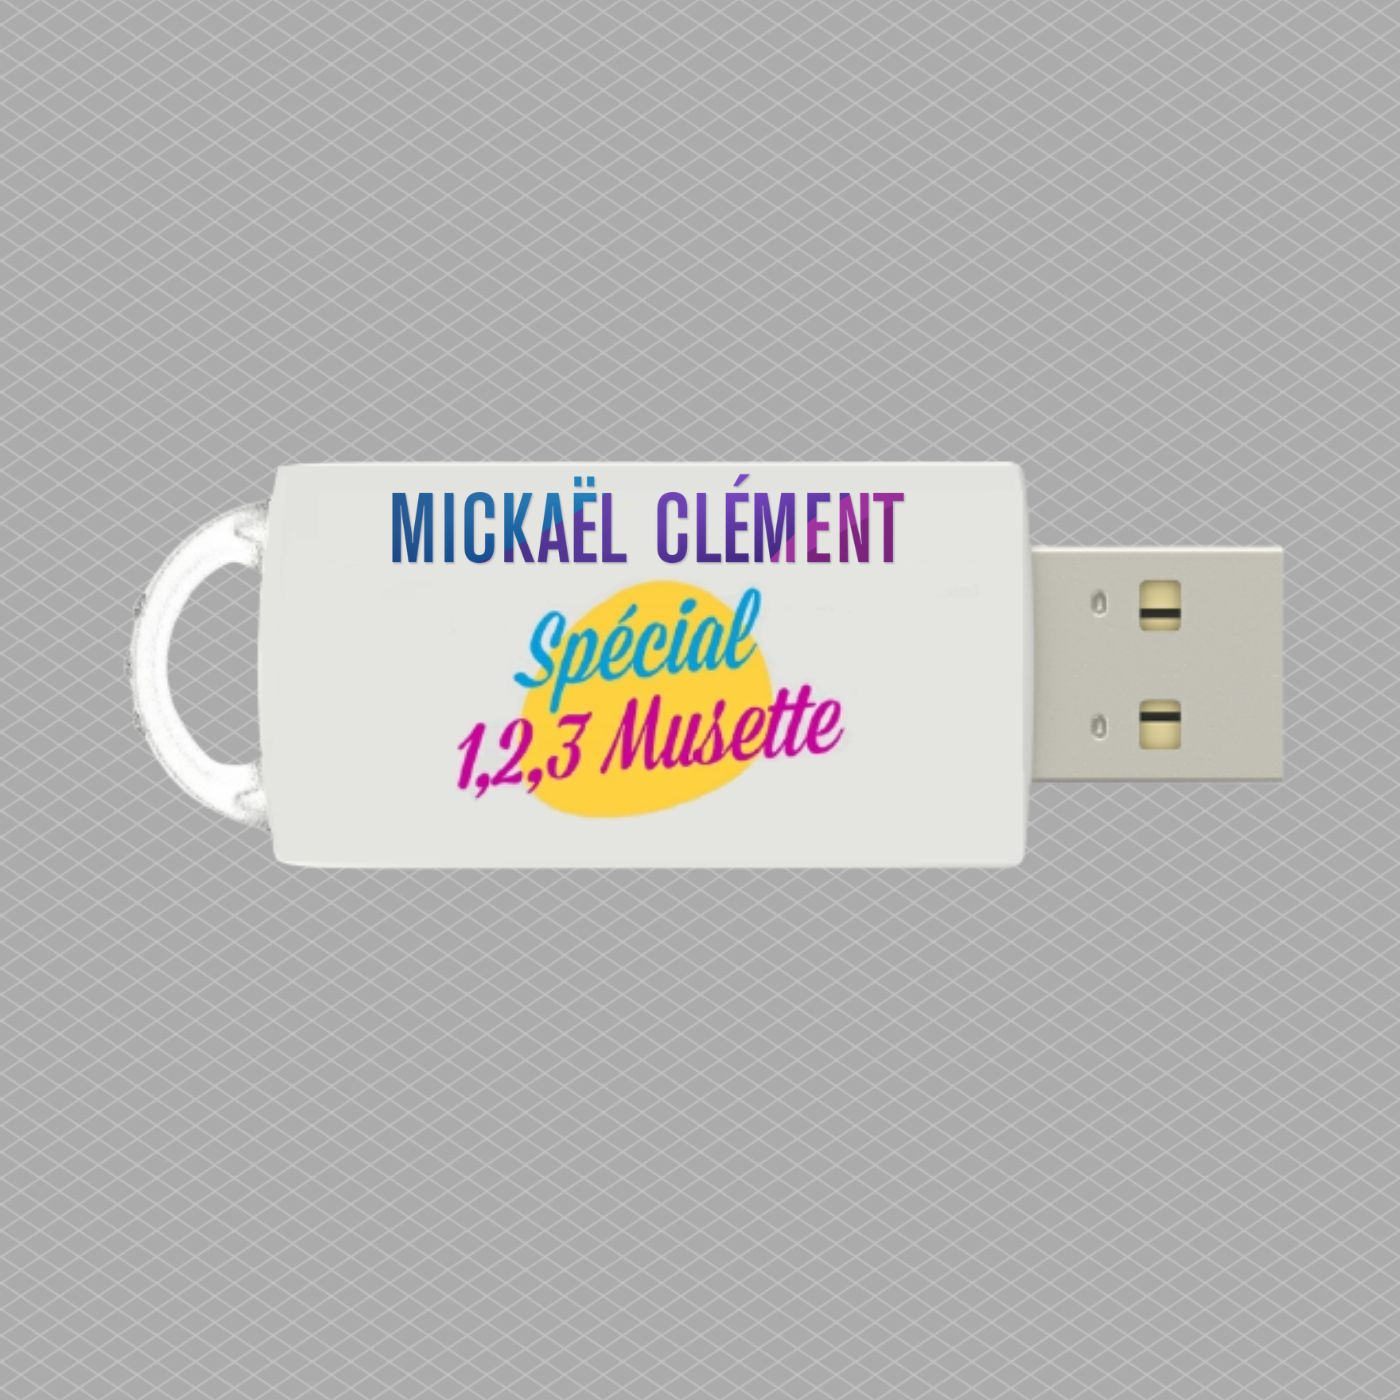 Cle usb mickael clement